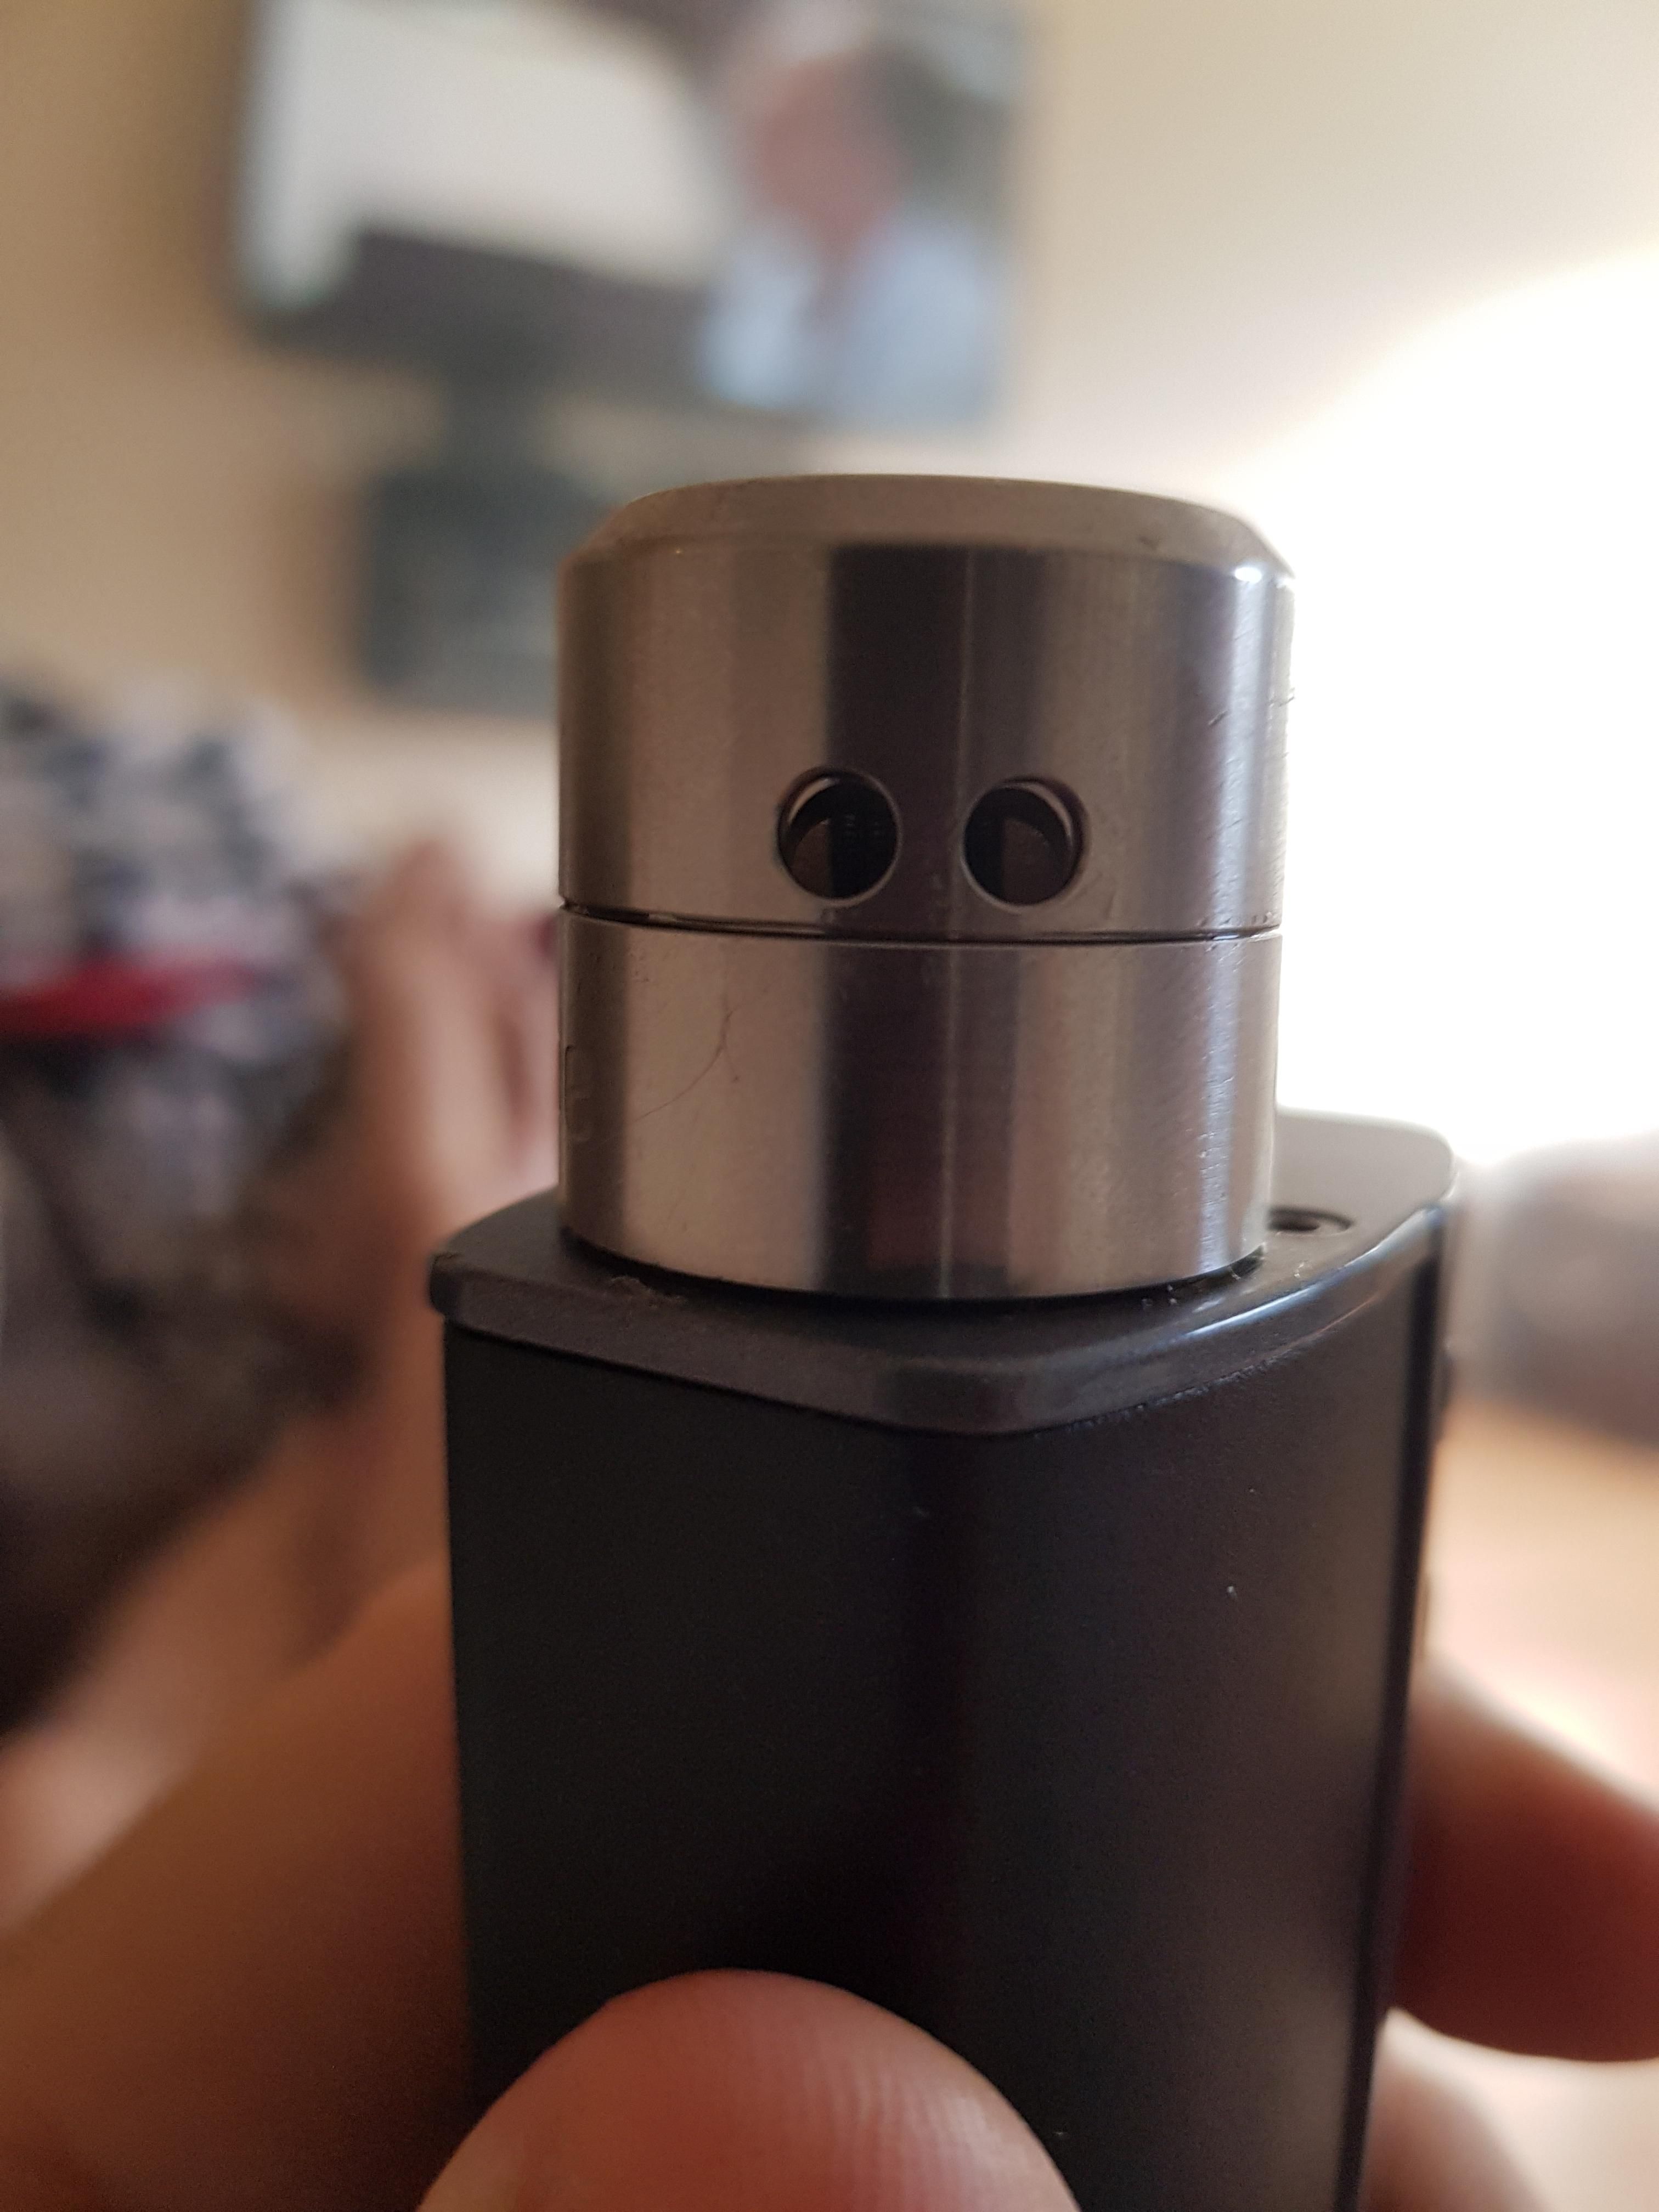 When you realise your vape looks like a Canadian from South park...